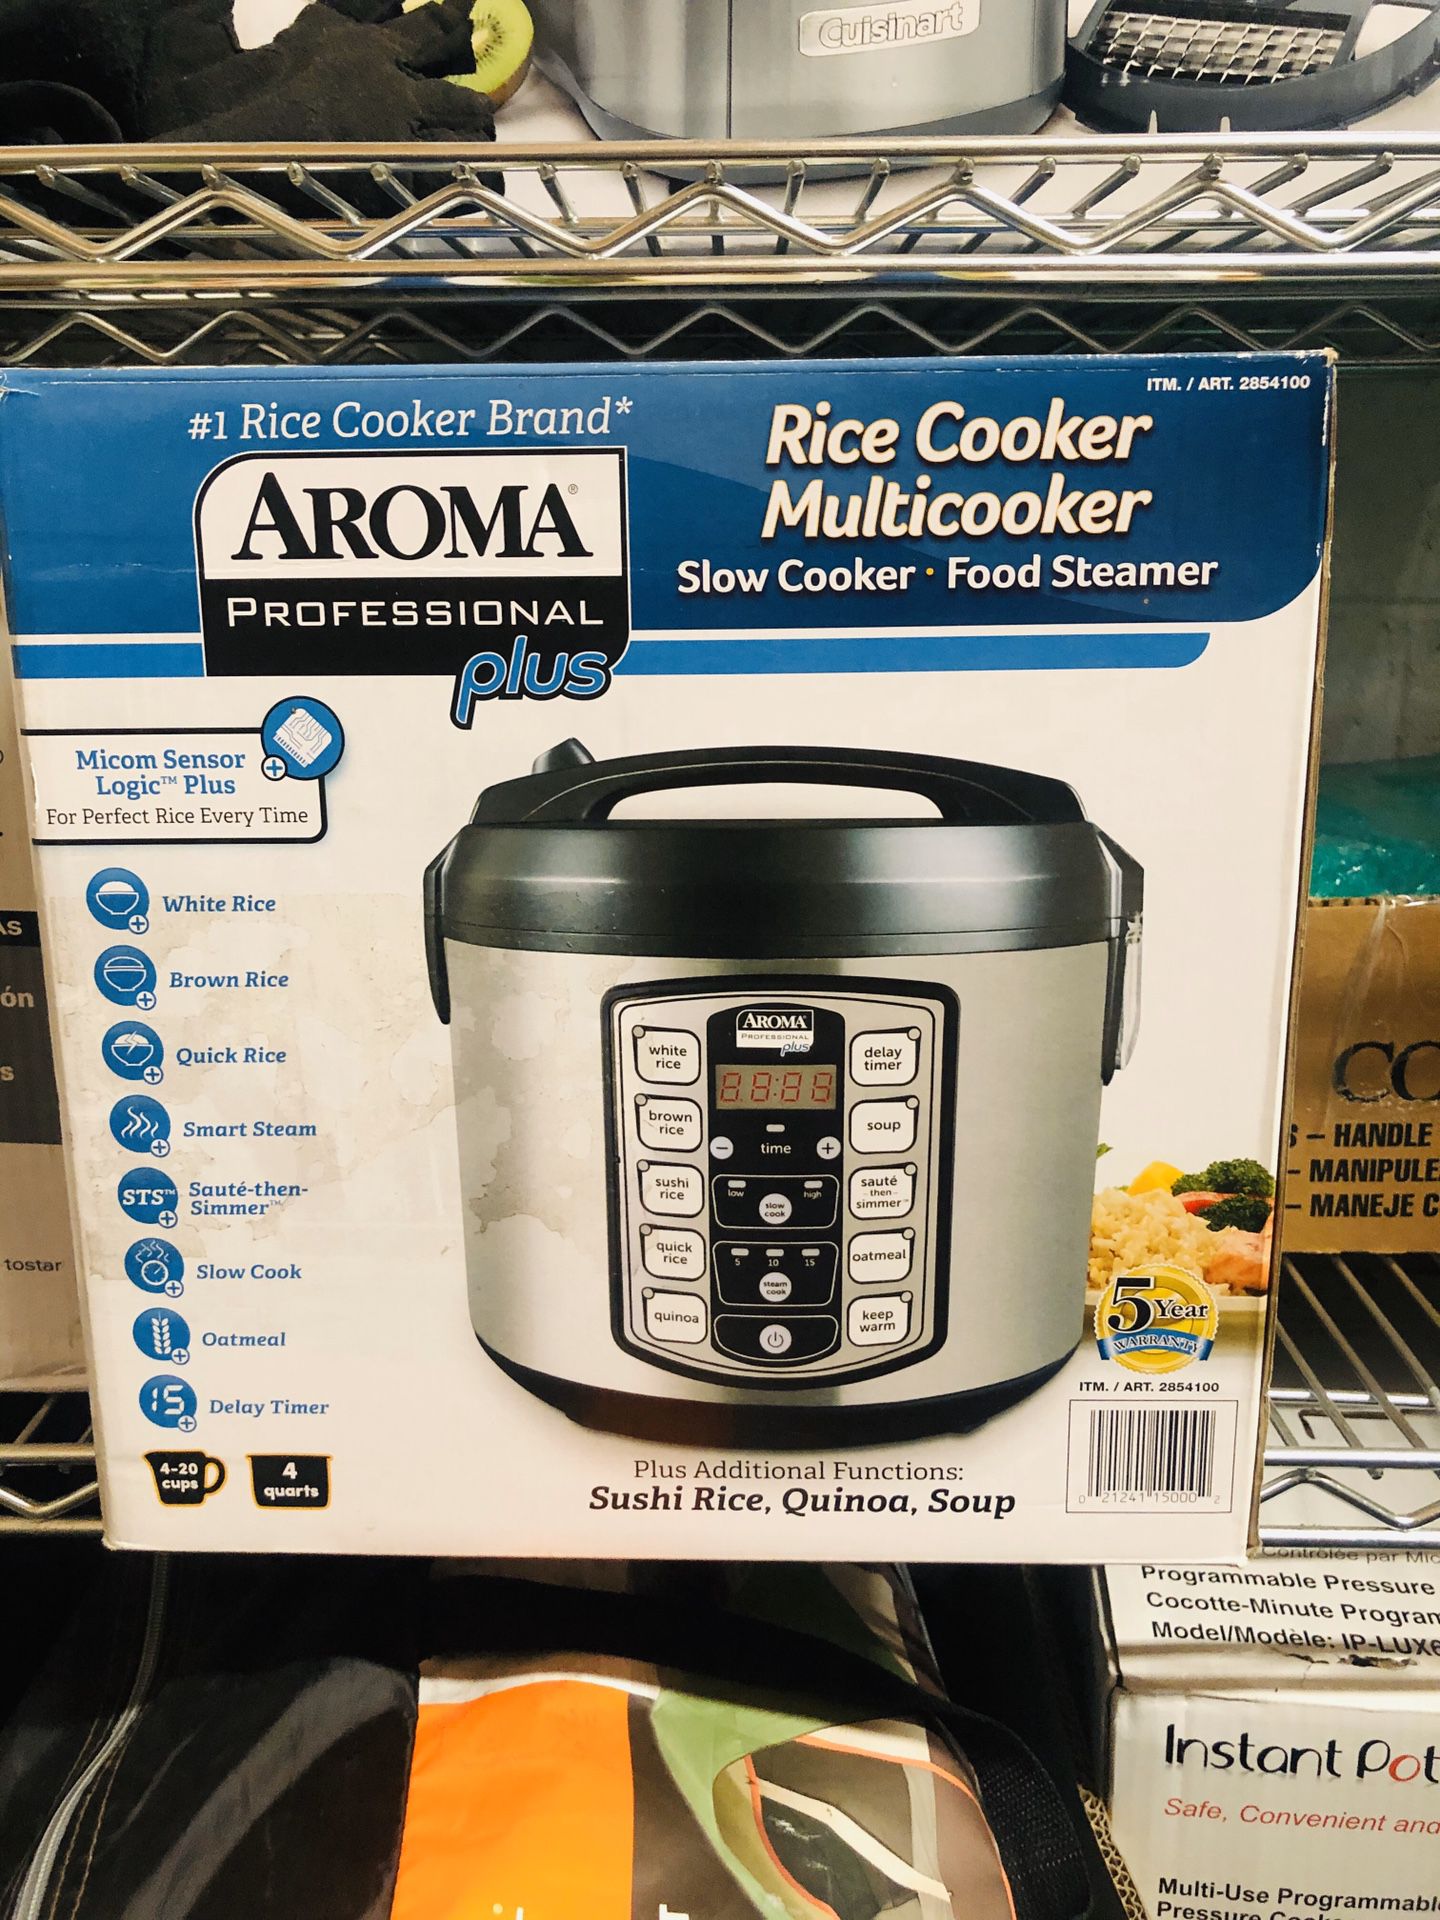 aroma professional plus arc-5000sb 20-cup (cooked) digital rice cooker, food steamer, slow cooker, stainless exterior/nonstick pot